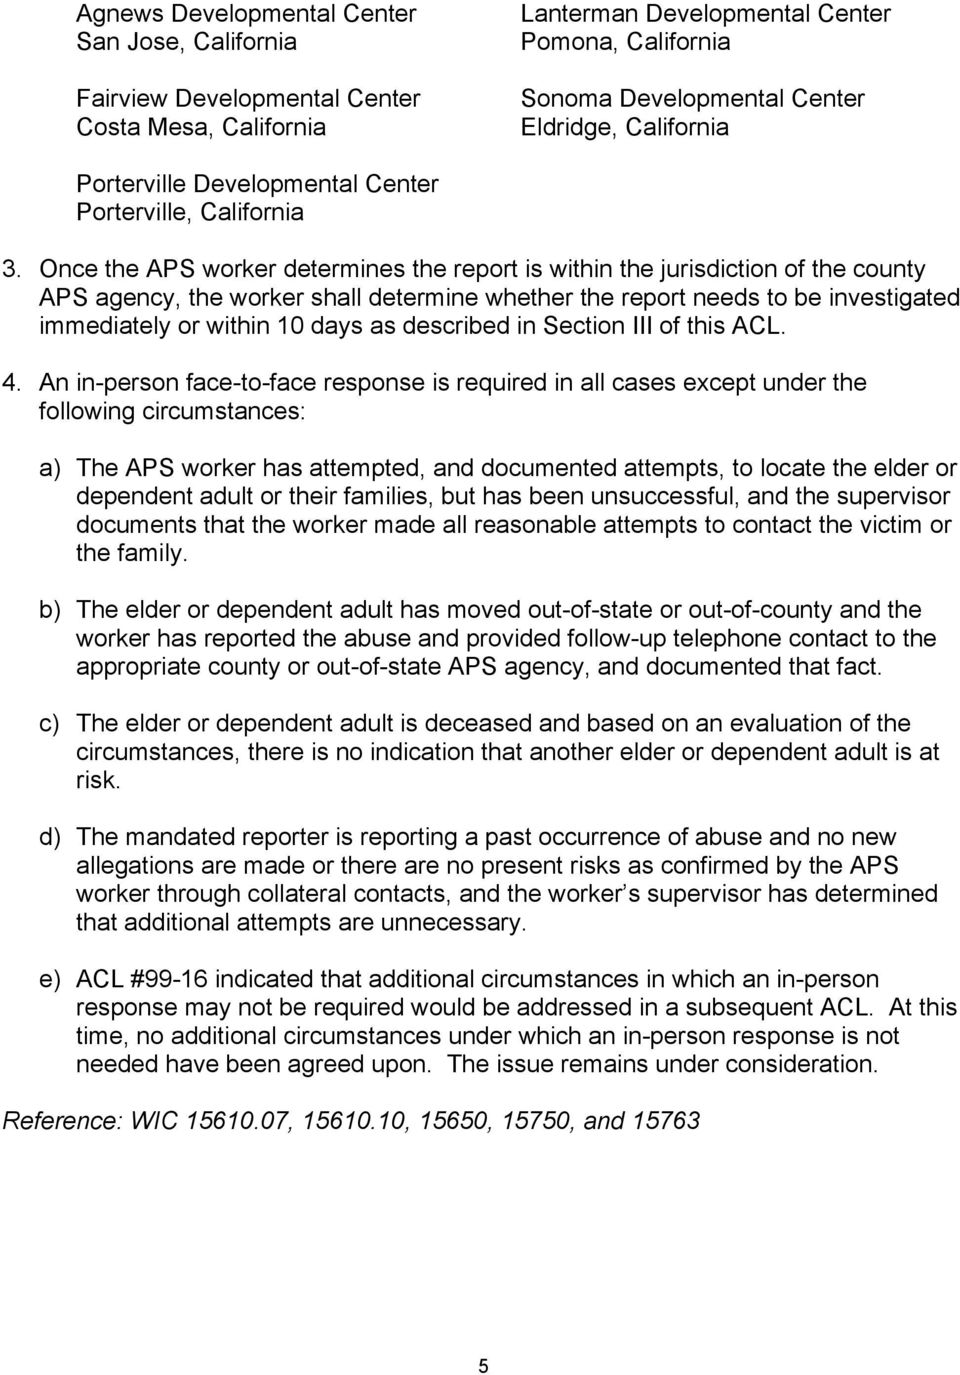 Once the APS worker determines the report is within the jurisdiction of the county APS agency, the worker shall determine whether the report needs to be investigated immediately or within 10 days as